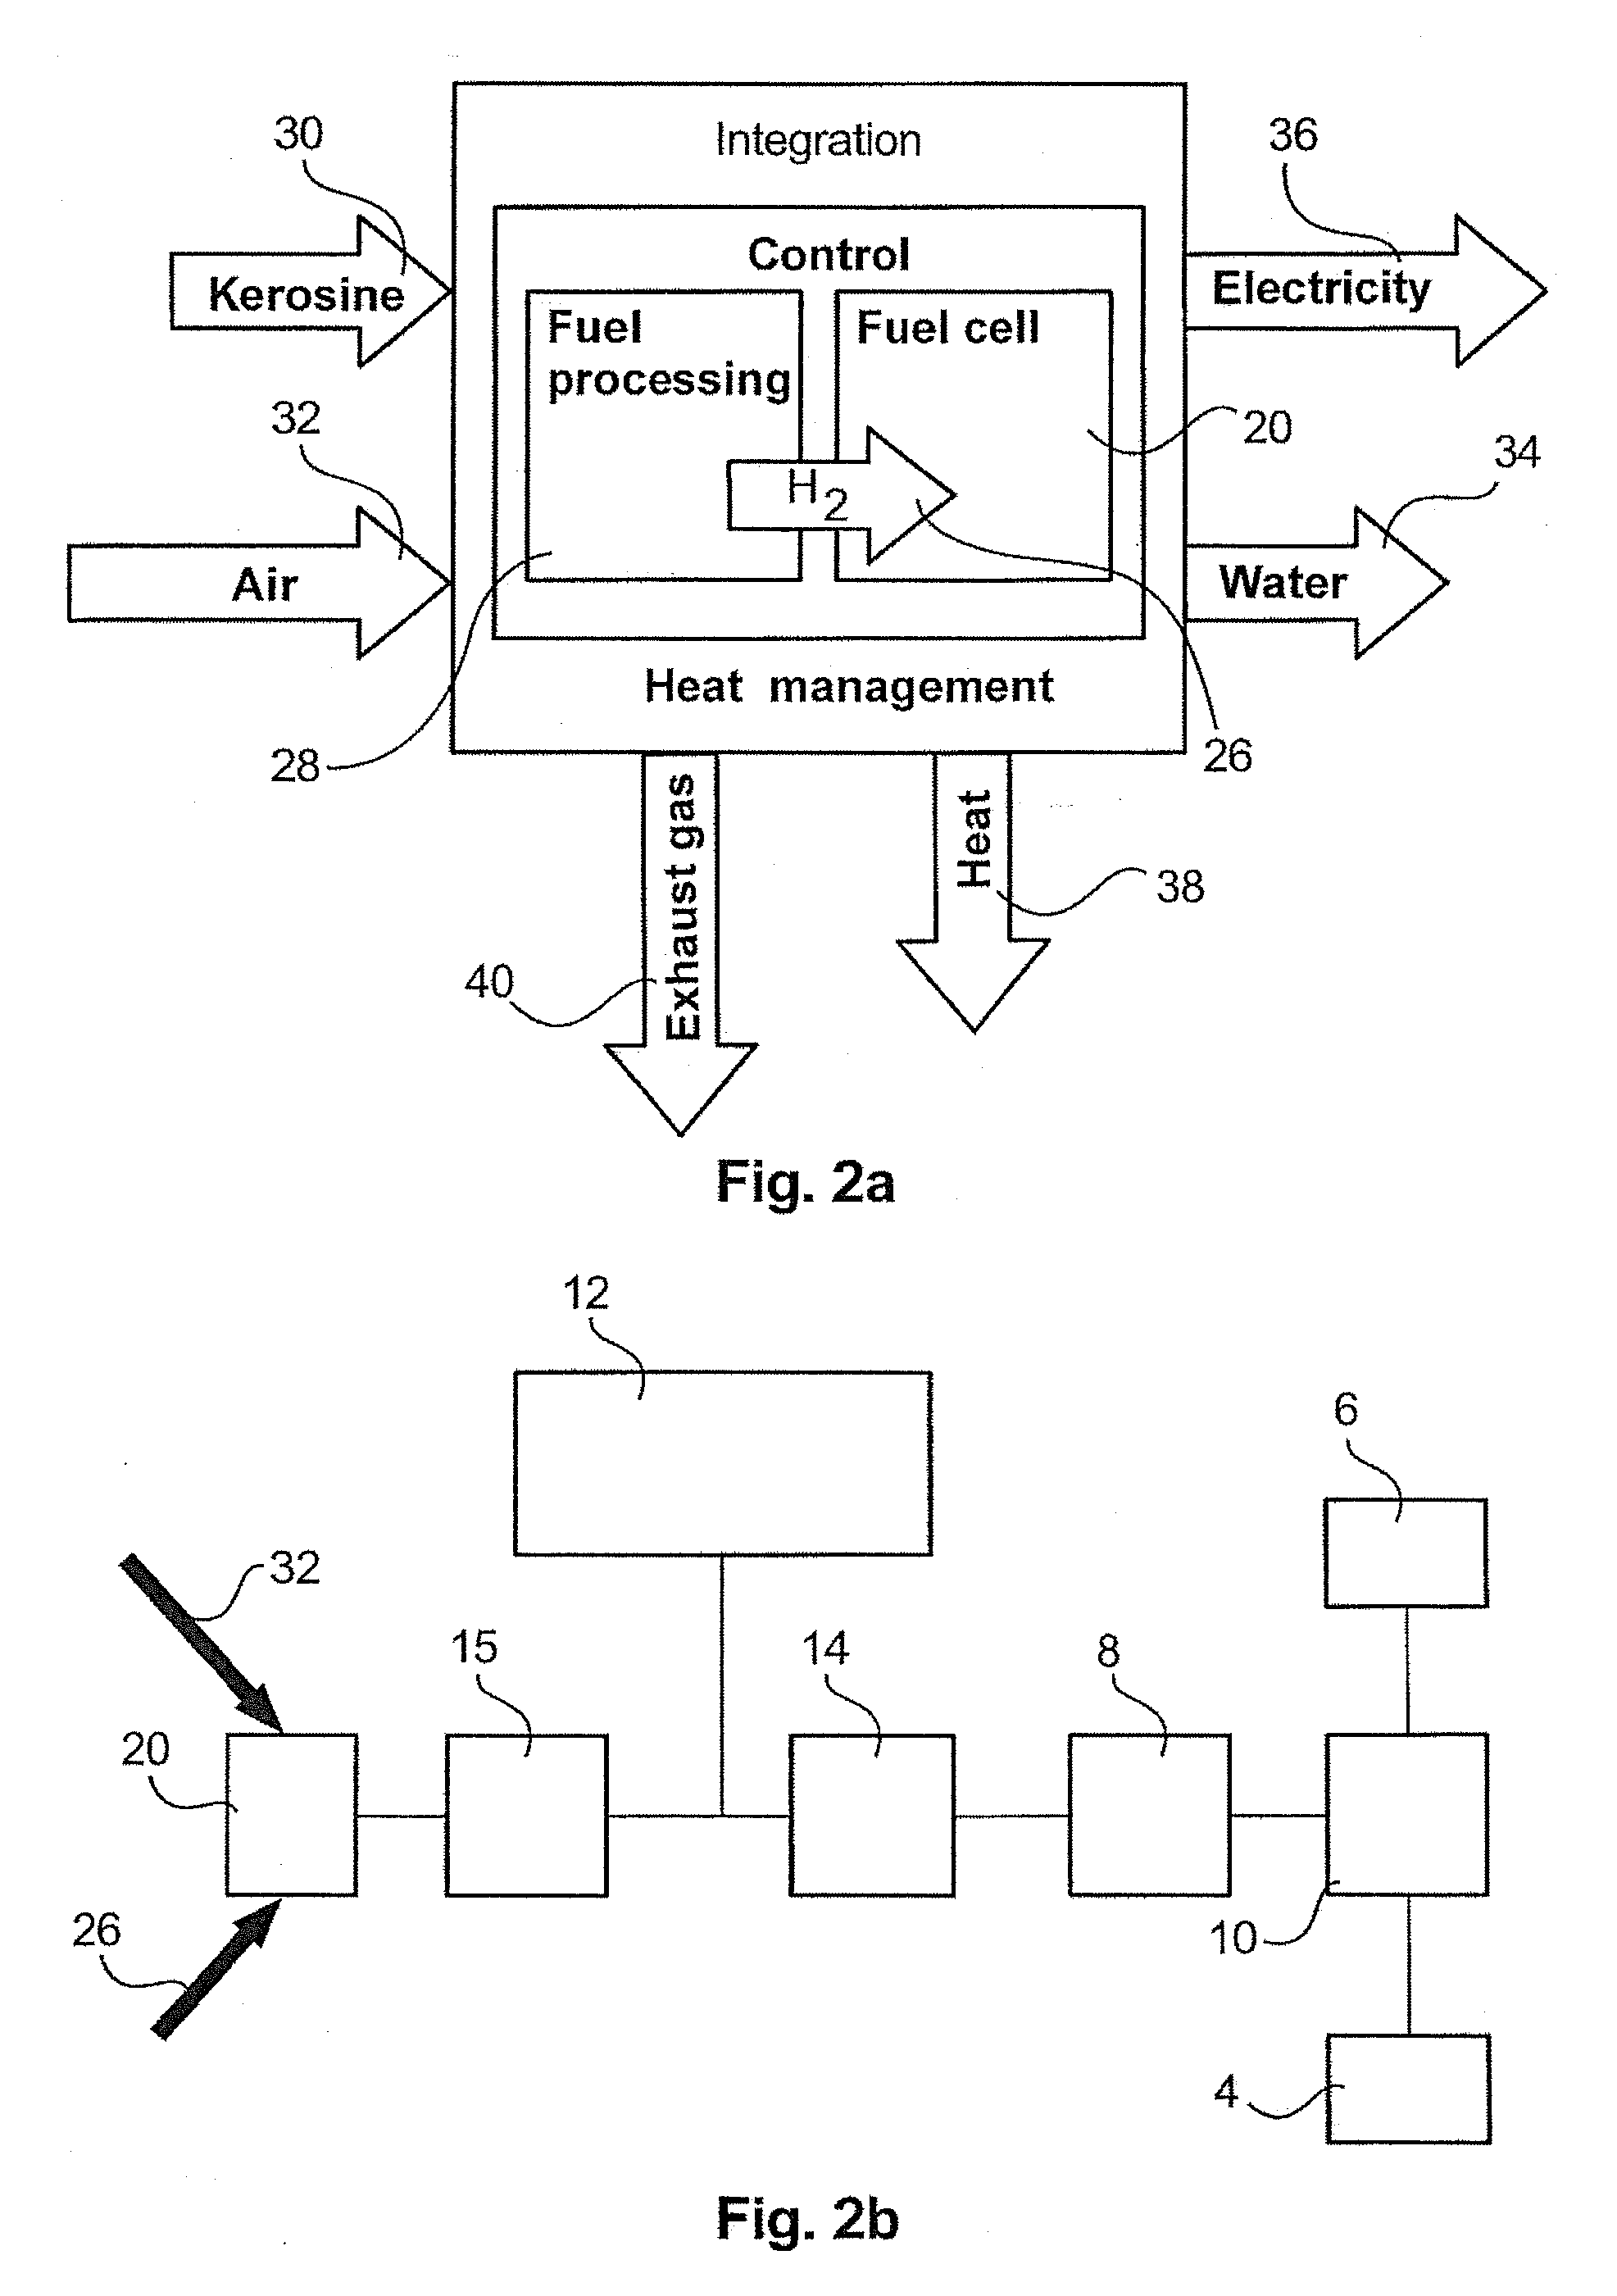 Wheel drive system for an aircraft comprising a fuel cell as an energy source